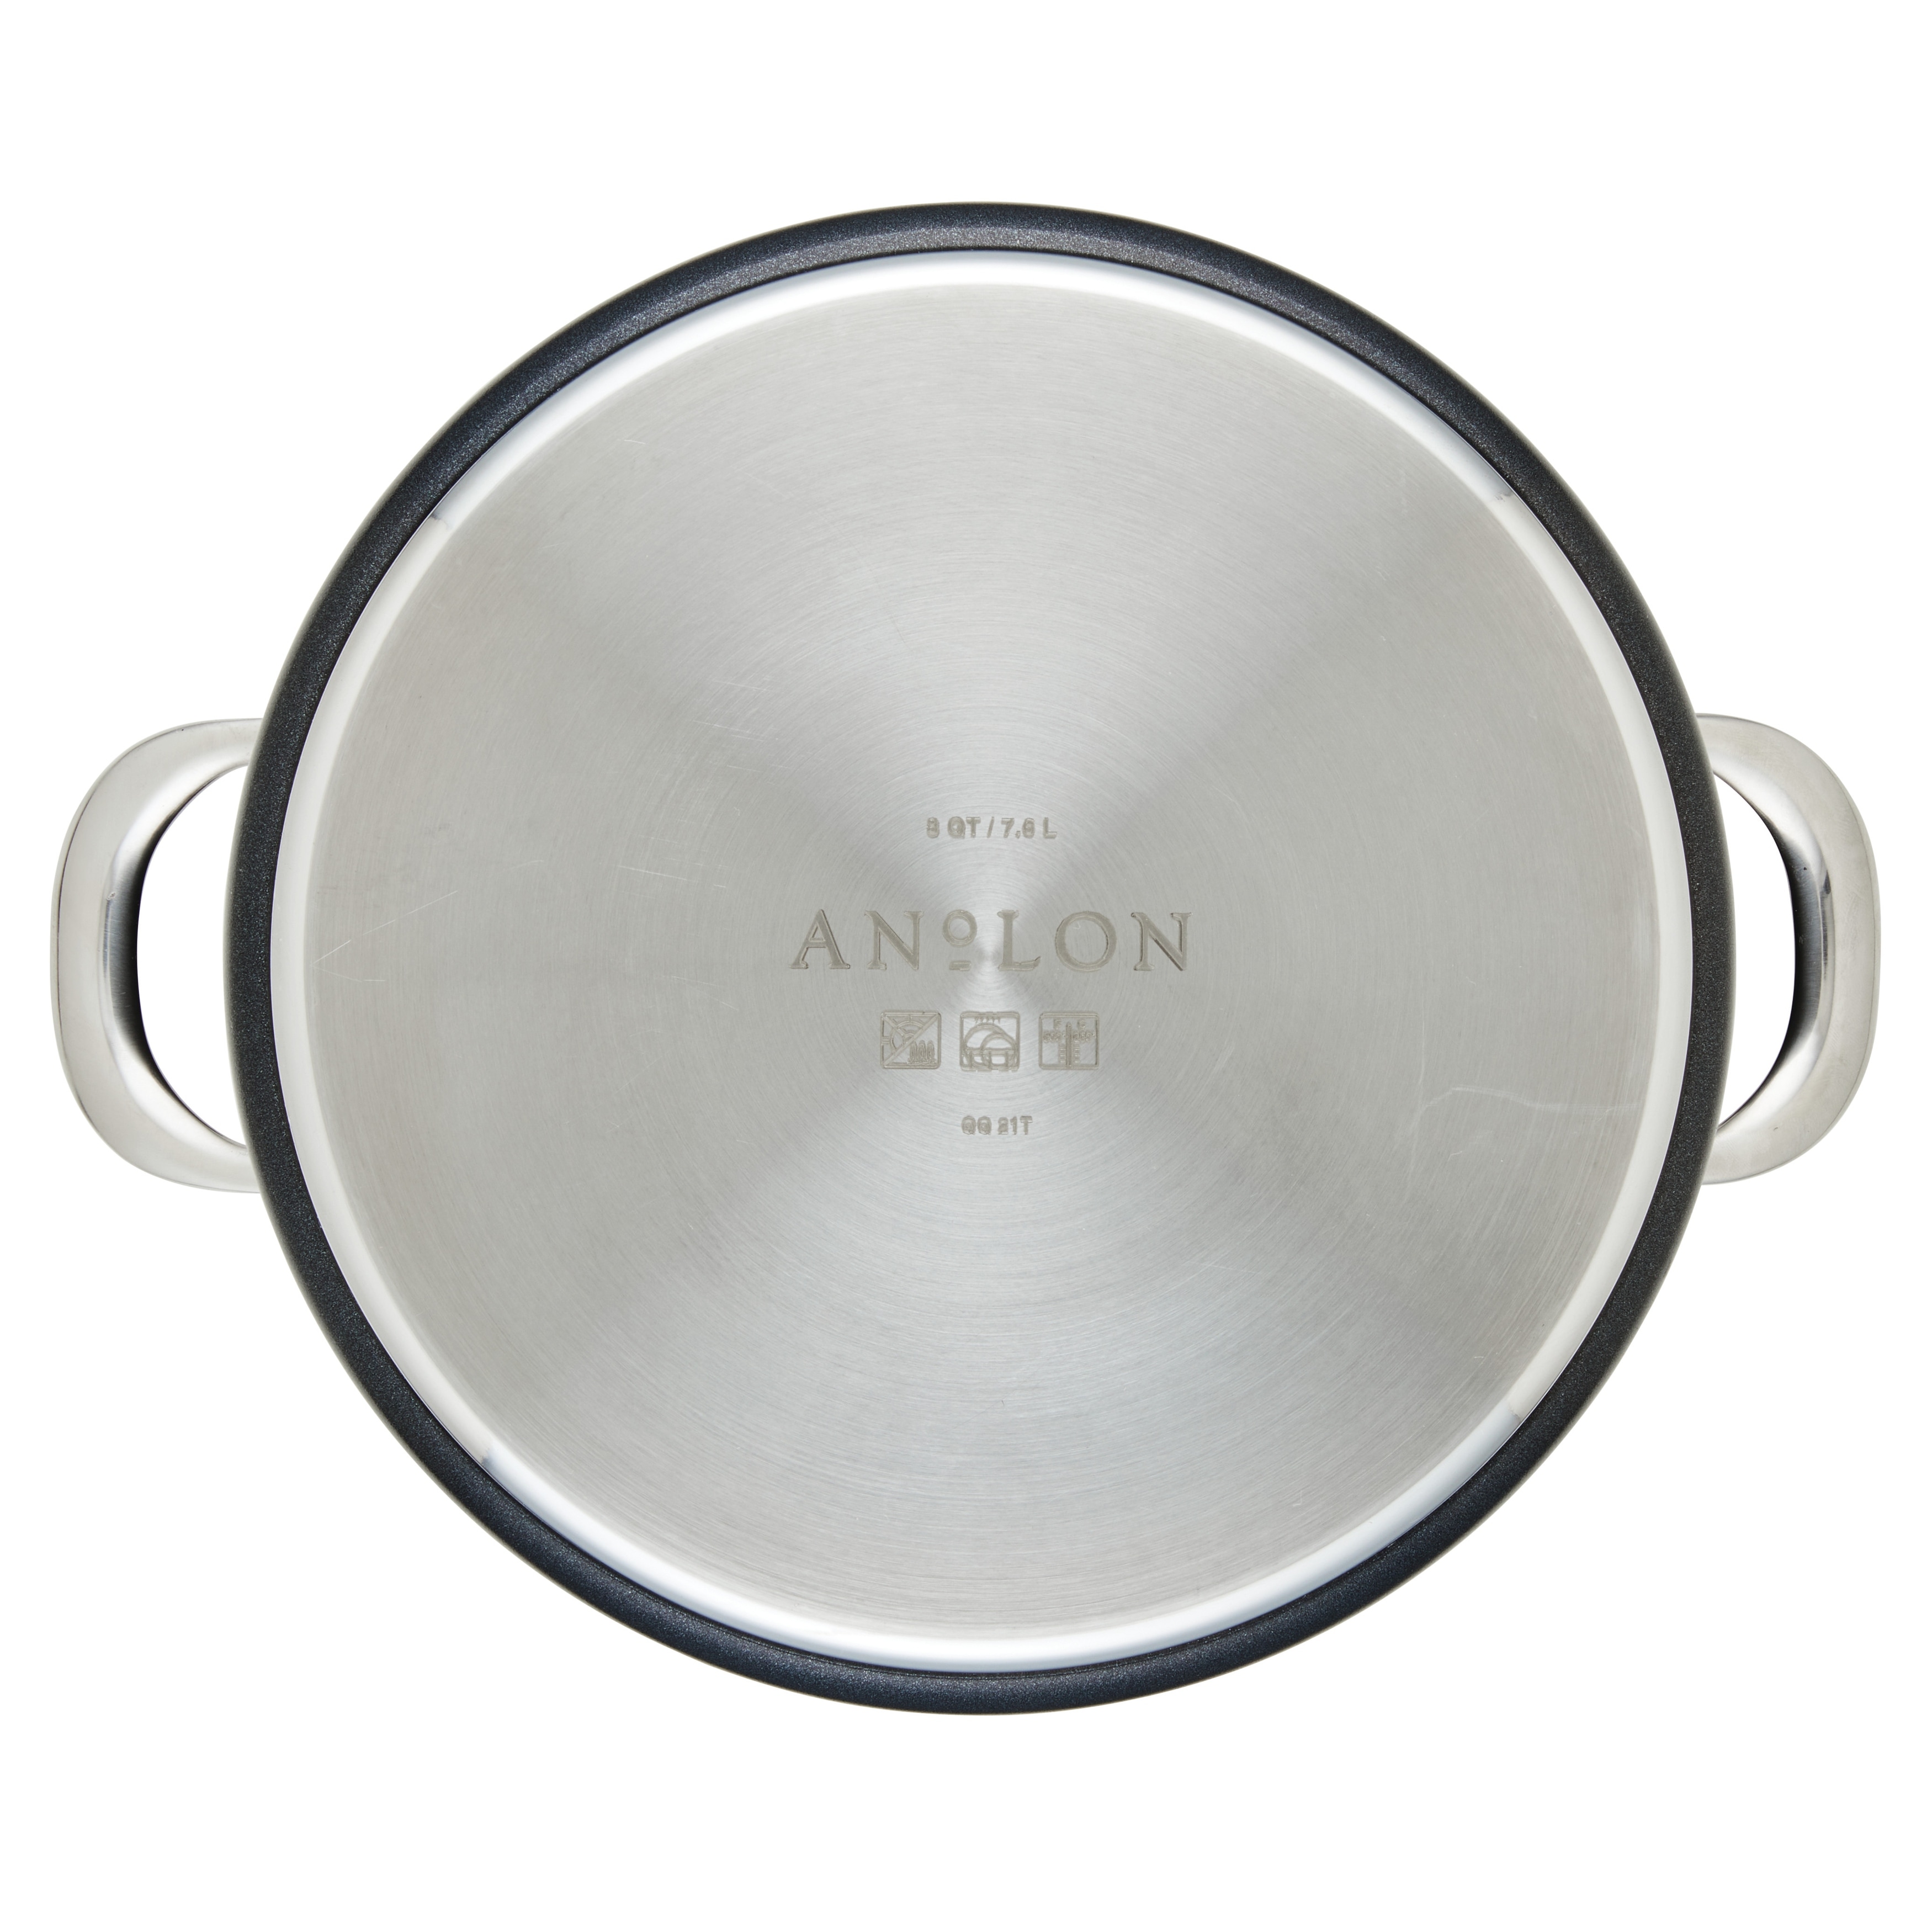 Anolon X Hybrid Nonstick Induction Frying Pan With Helper Handle, 12-Inch,  Charcoal Gray - Bed Bath & Beyond - 37910973